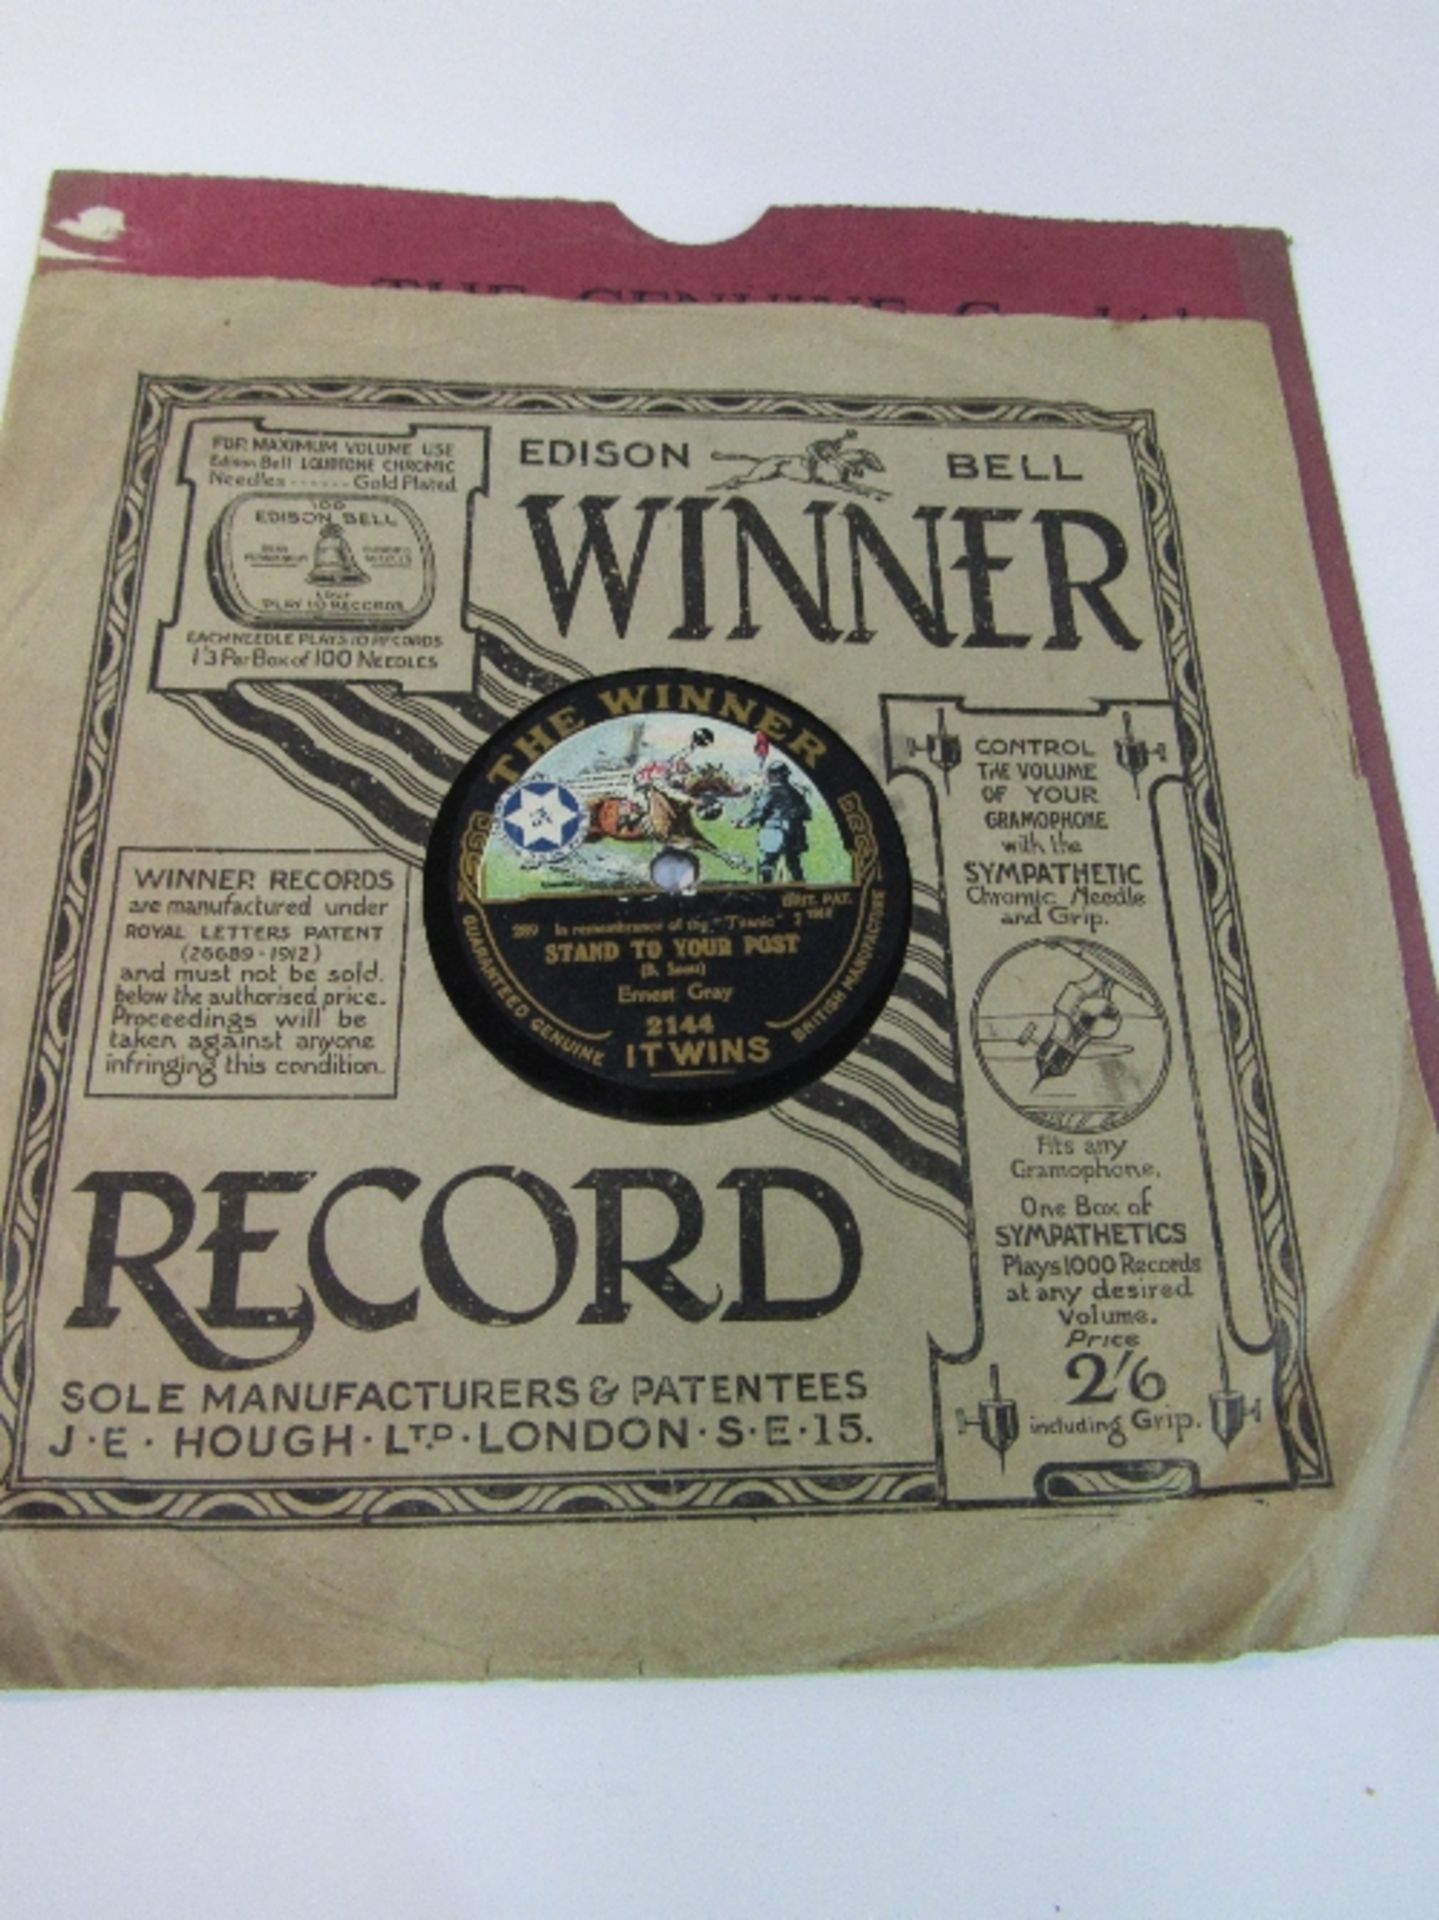 Titanic Souvenir Record, 78rpm. Issued in 1912, in remembrance of the Titanic. Double sided record